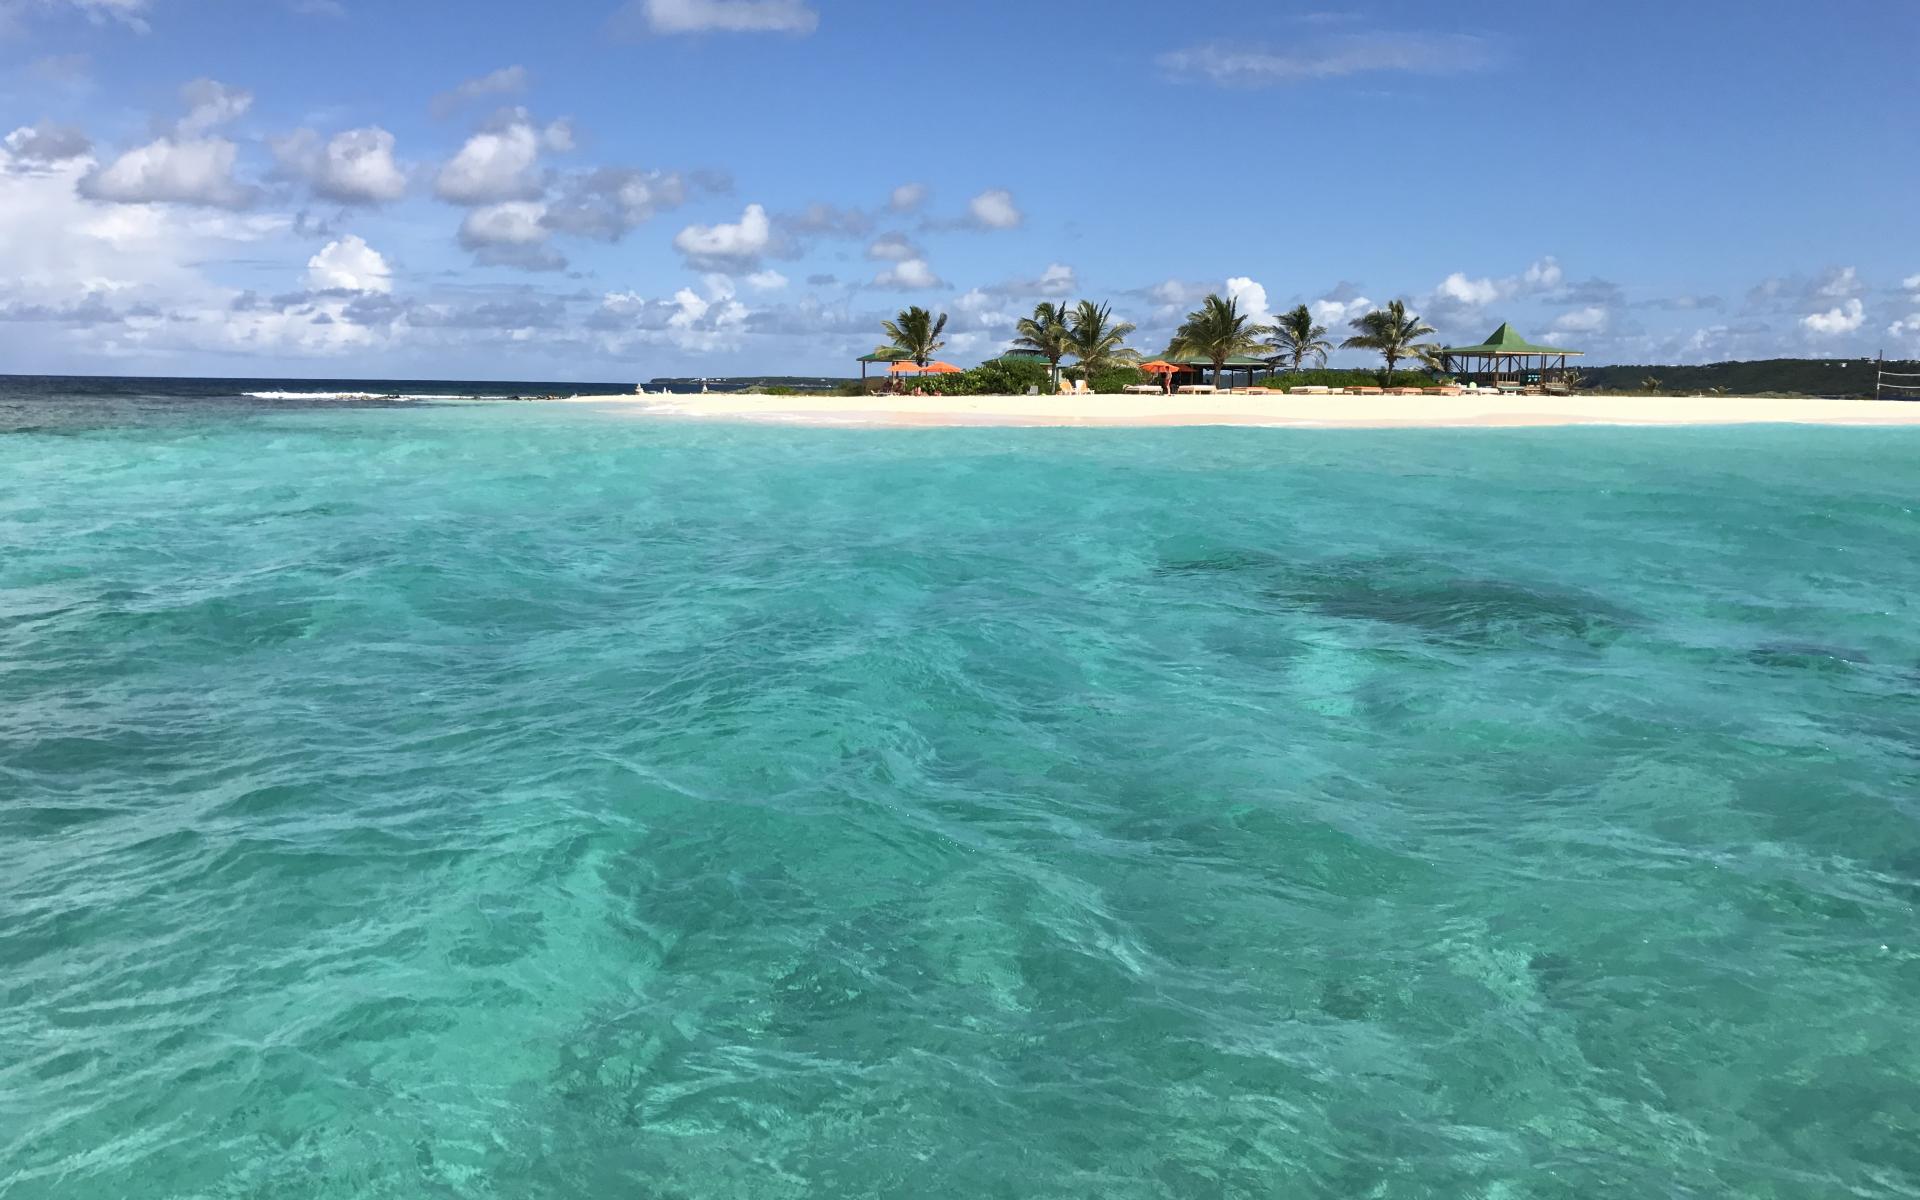 Why I love Anguilla by Tim Latimer